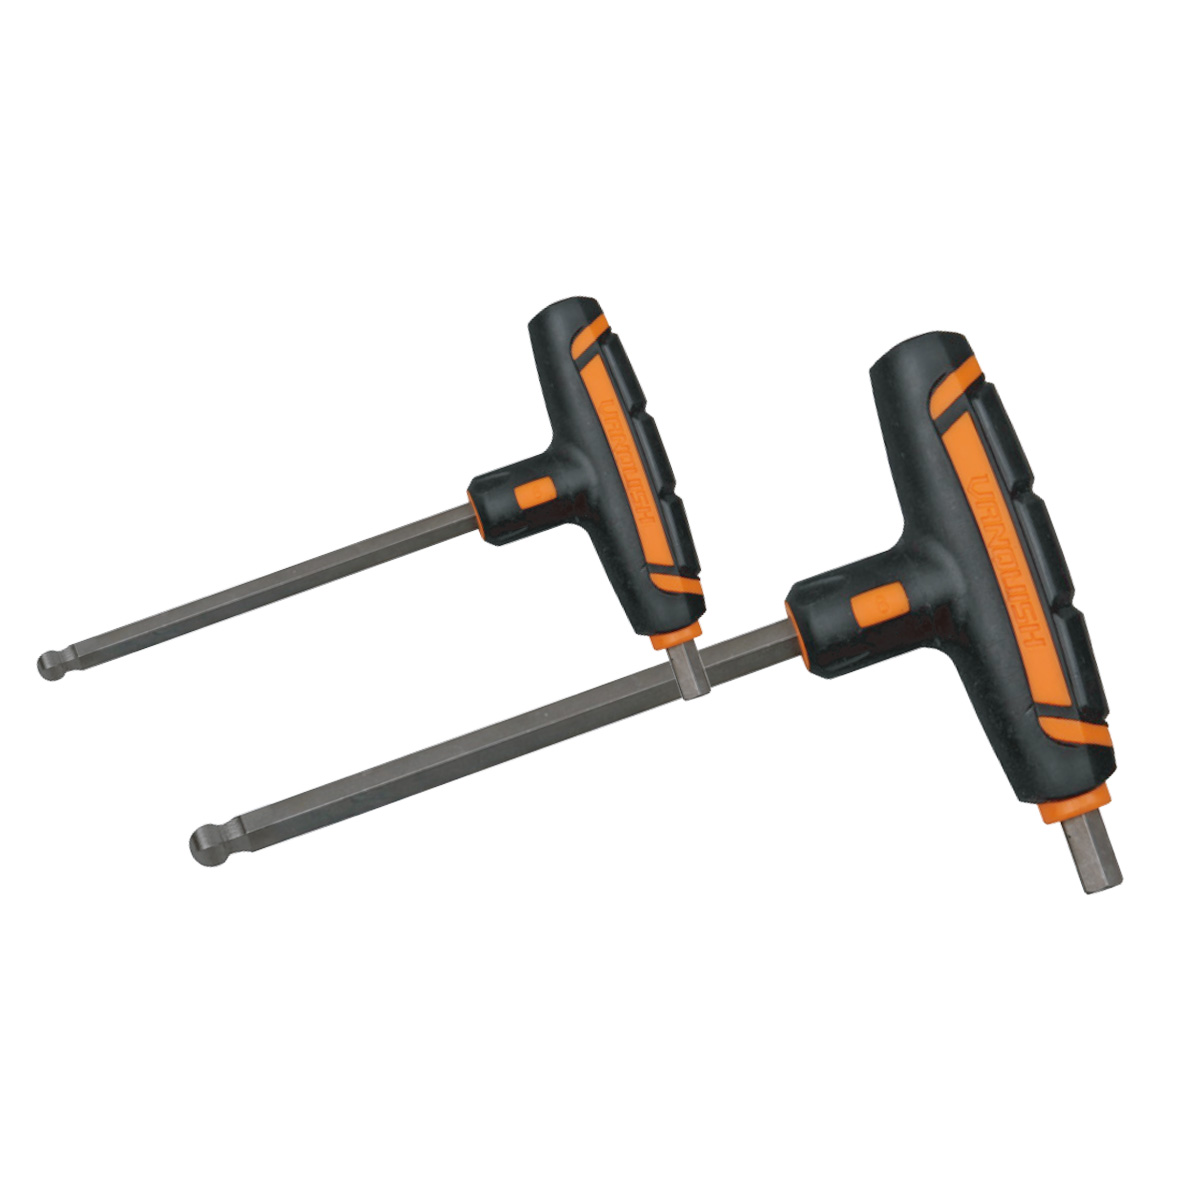 T HAND BALL END HEX KEY